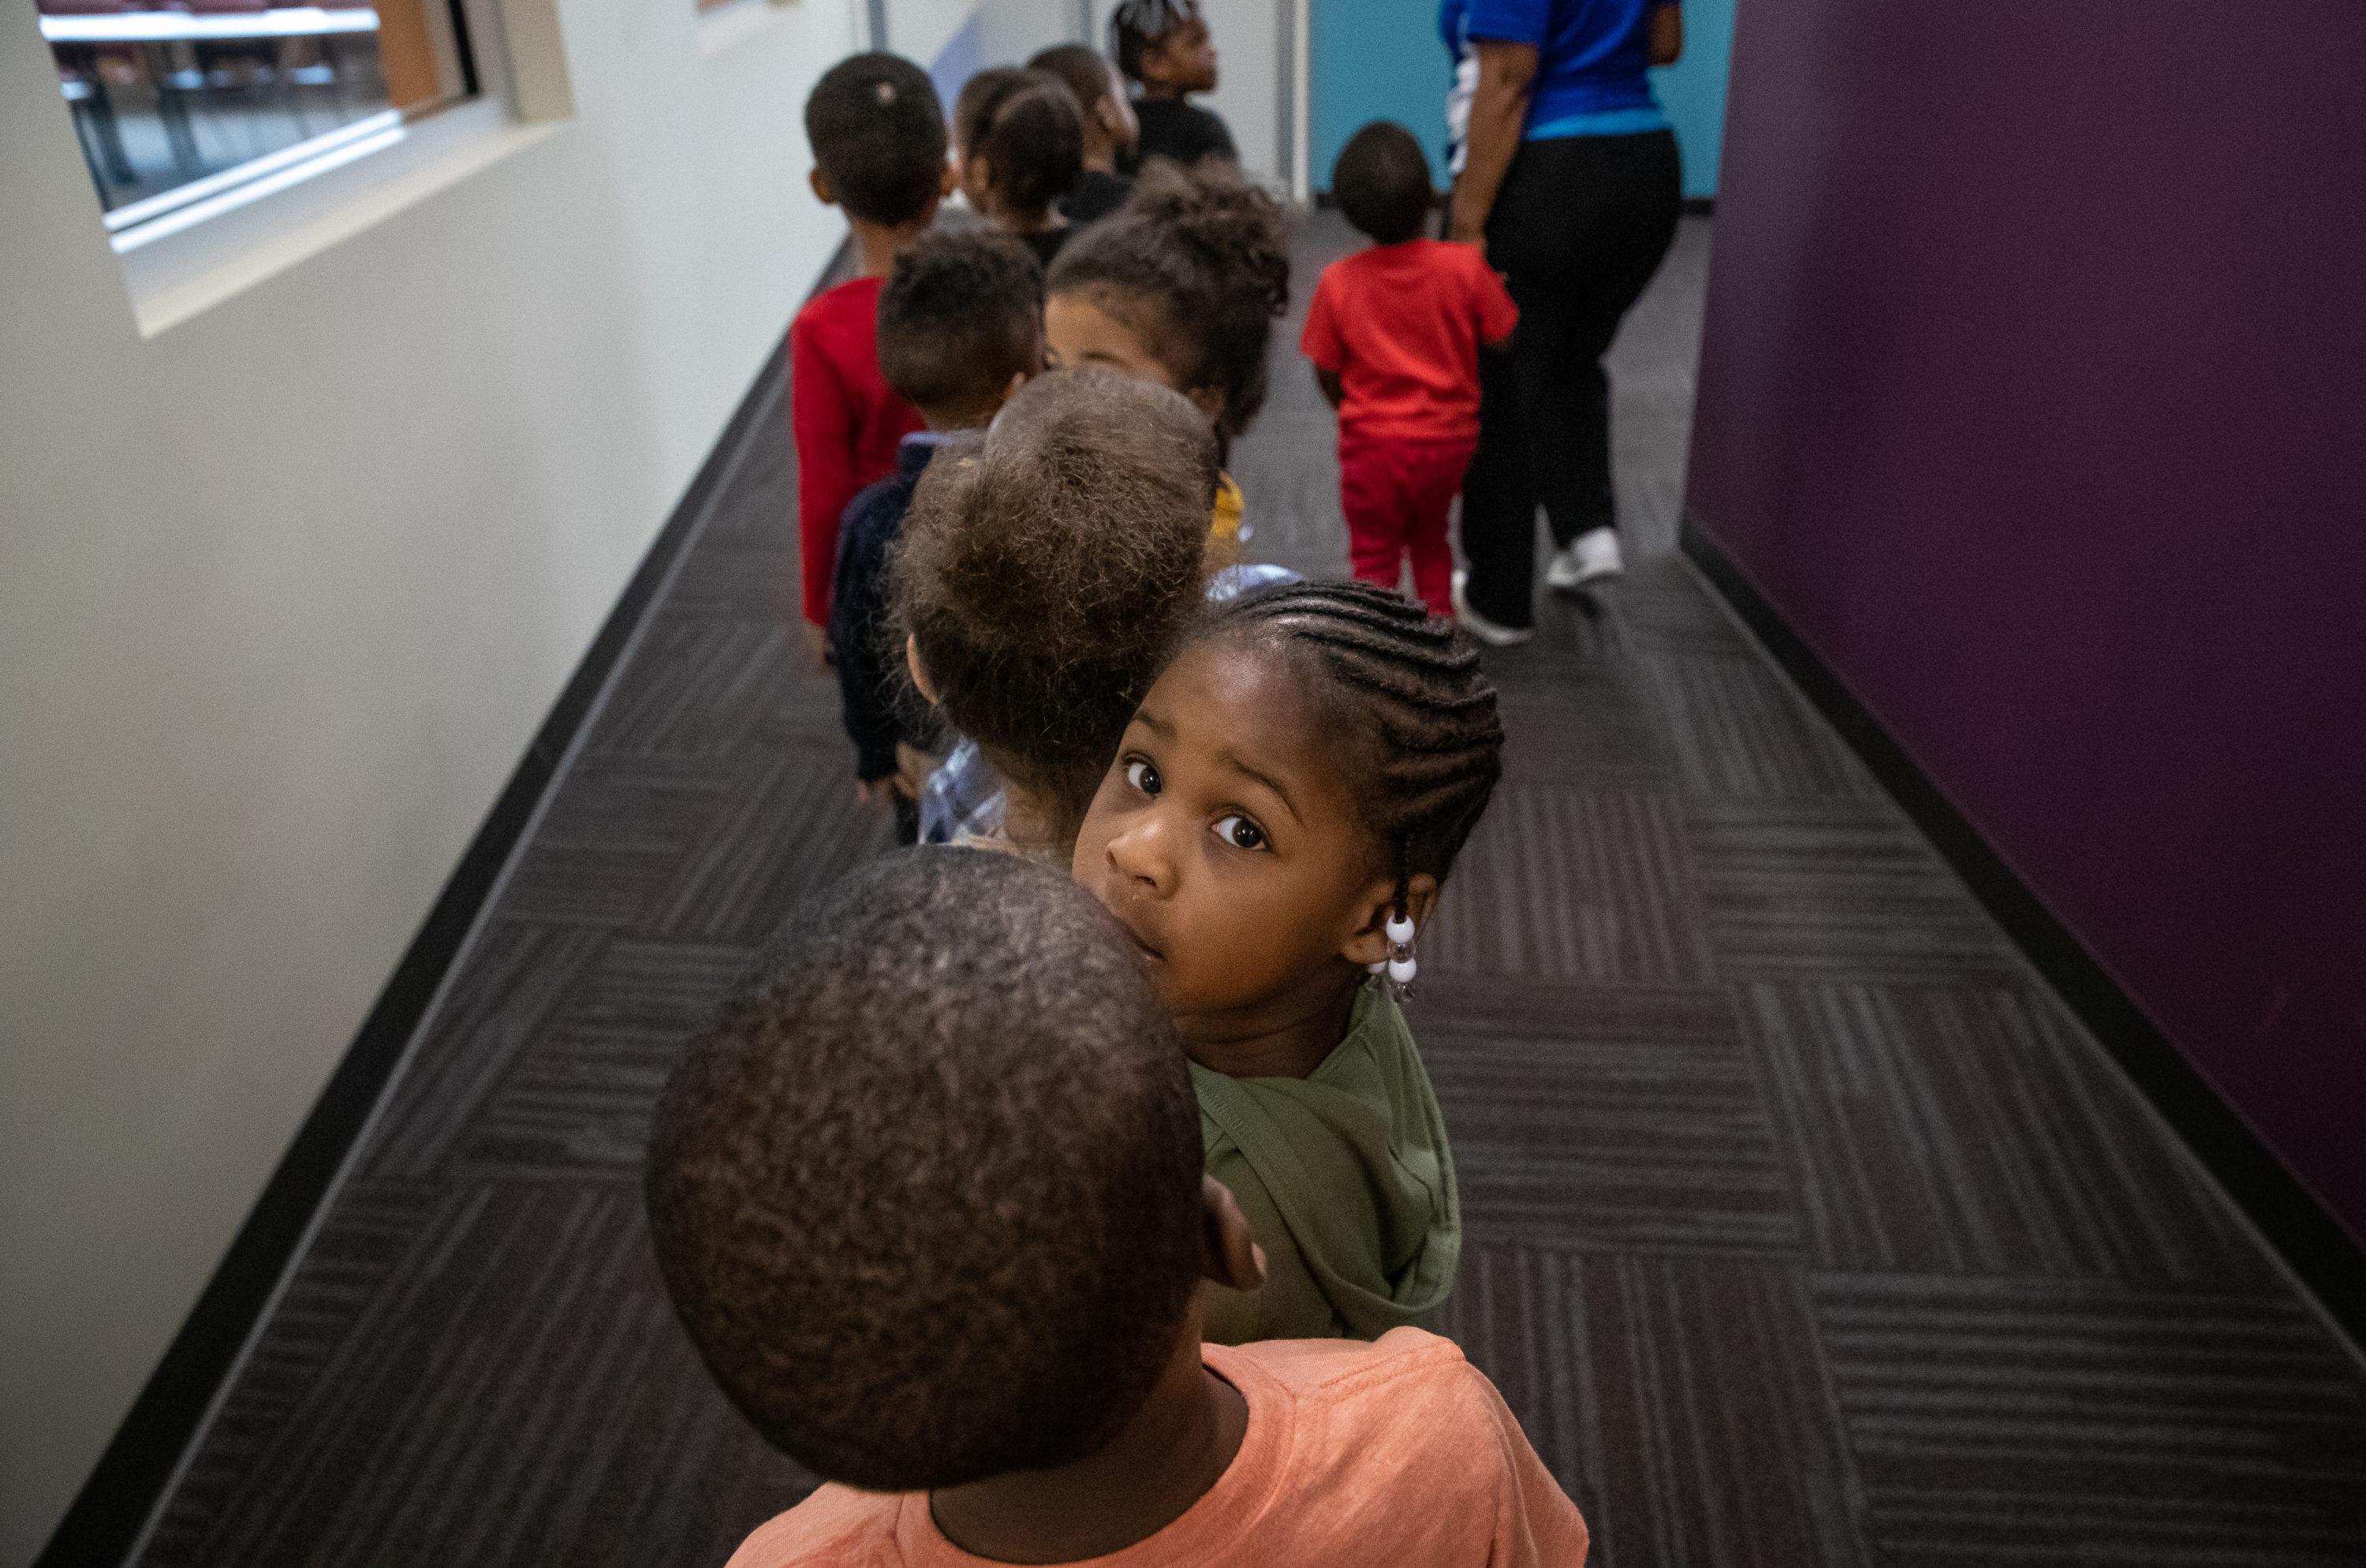 Preschool programs in Detroit have some of the strictest quality standards in the country.